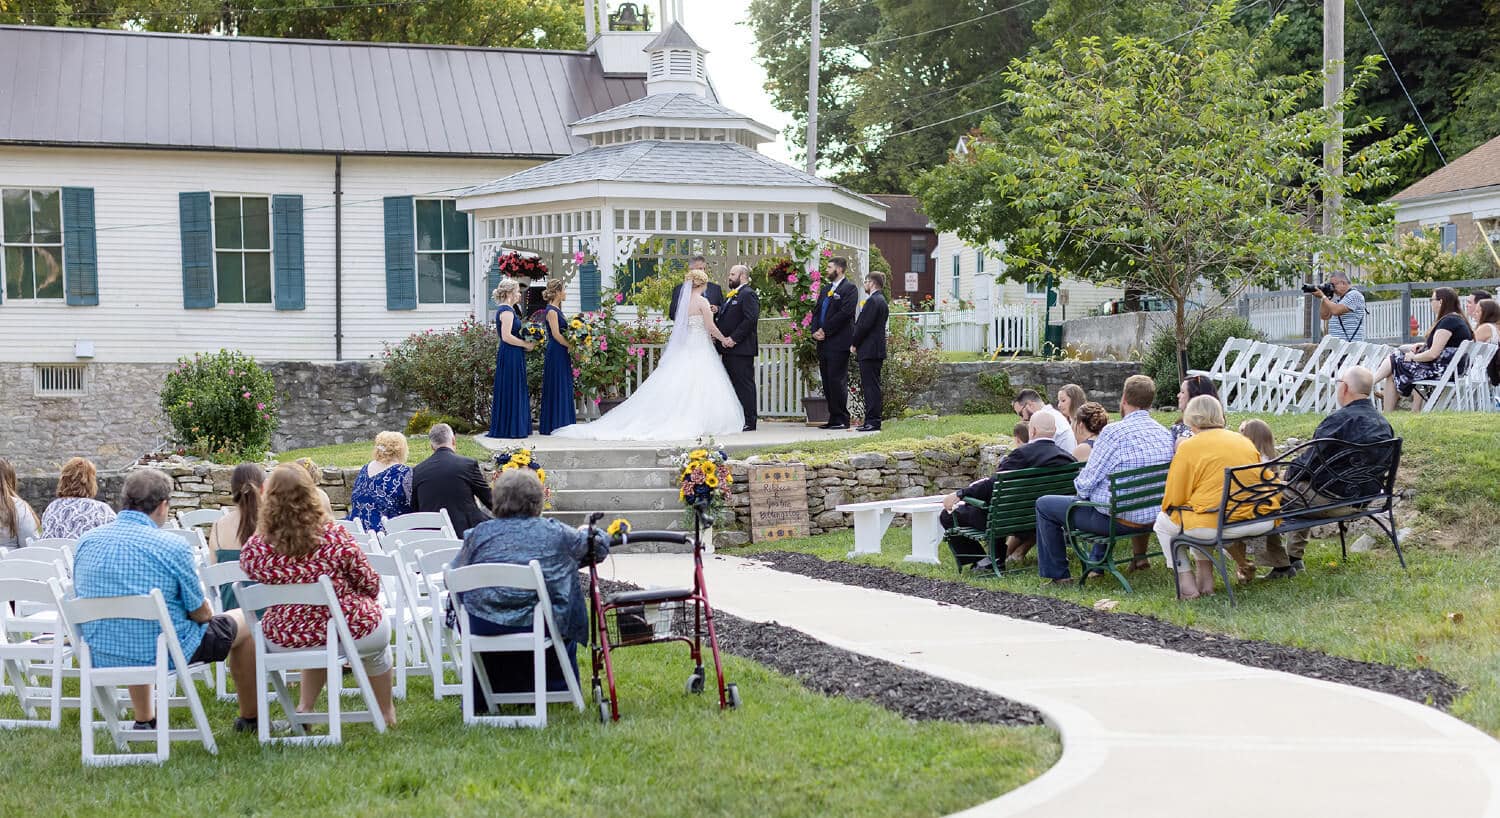 Guests sitting on chairs and benches on each side of cement walkway observing wedding ceremony with bridal party standing in front of white gazebo in distance.